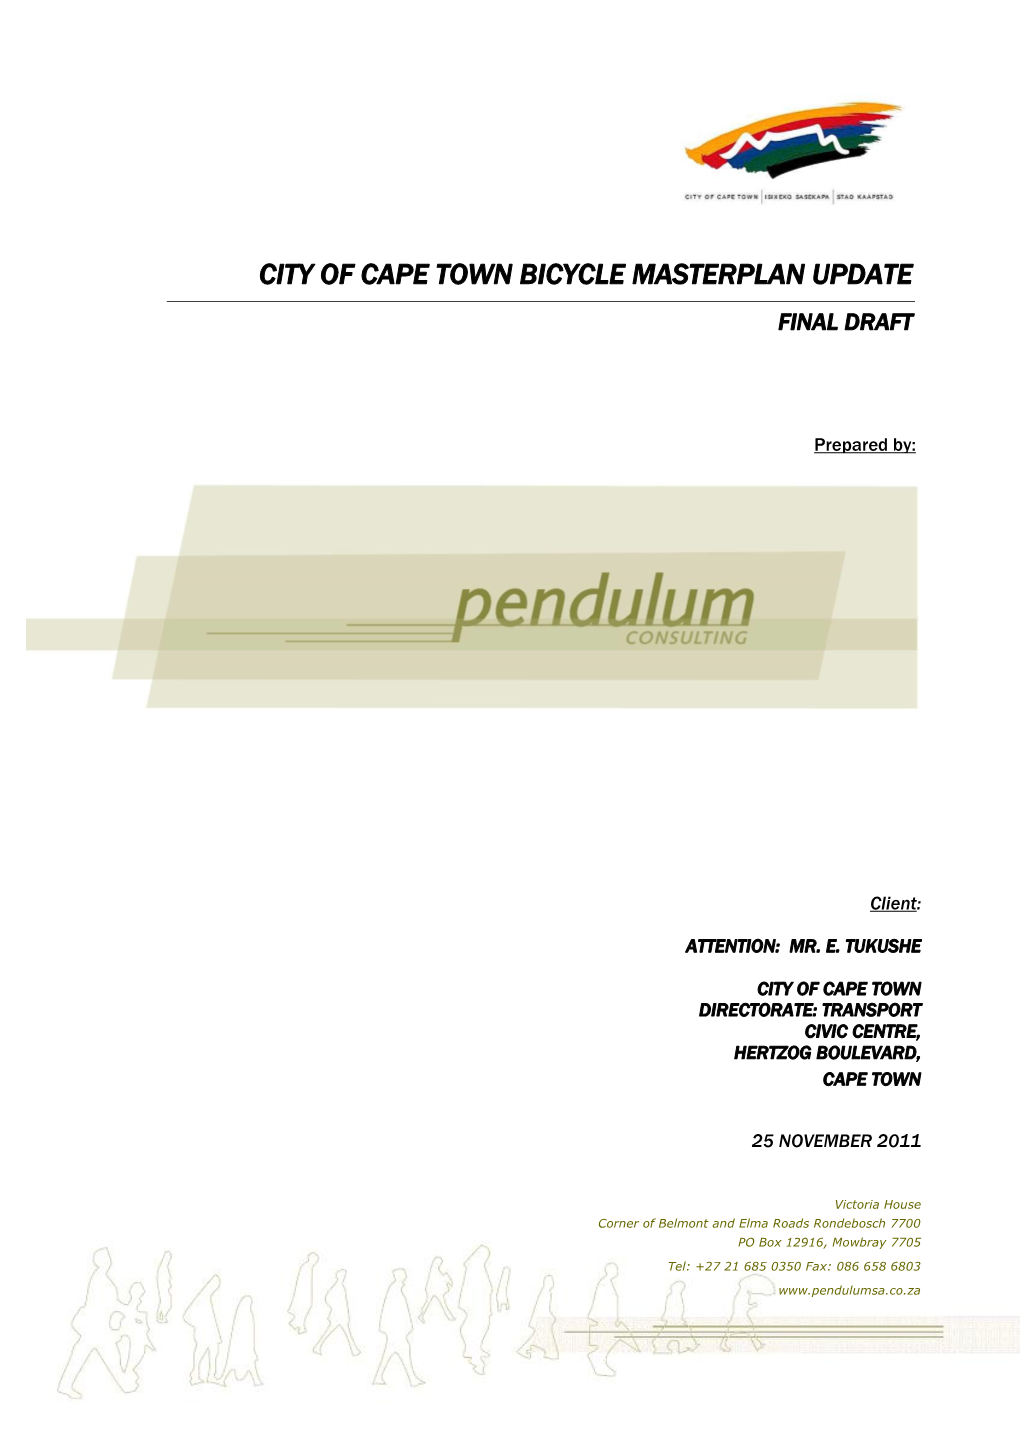 City of Cape Town Bicycle Masterplan Update Final Draft